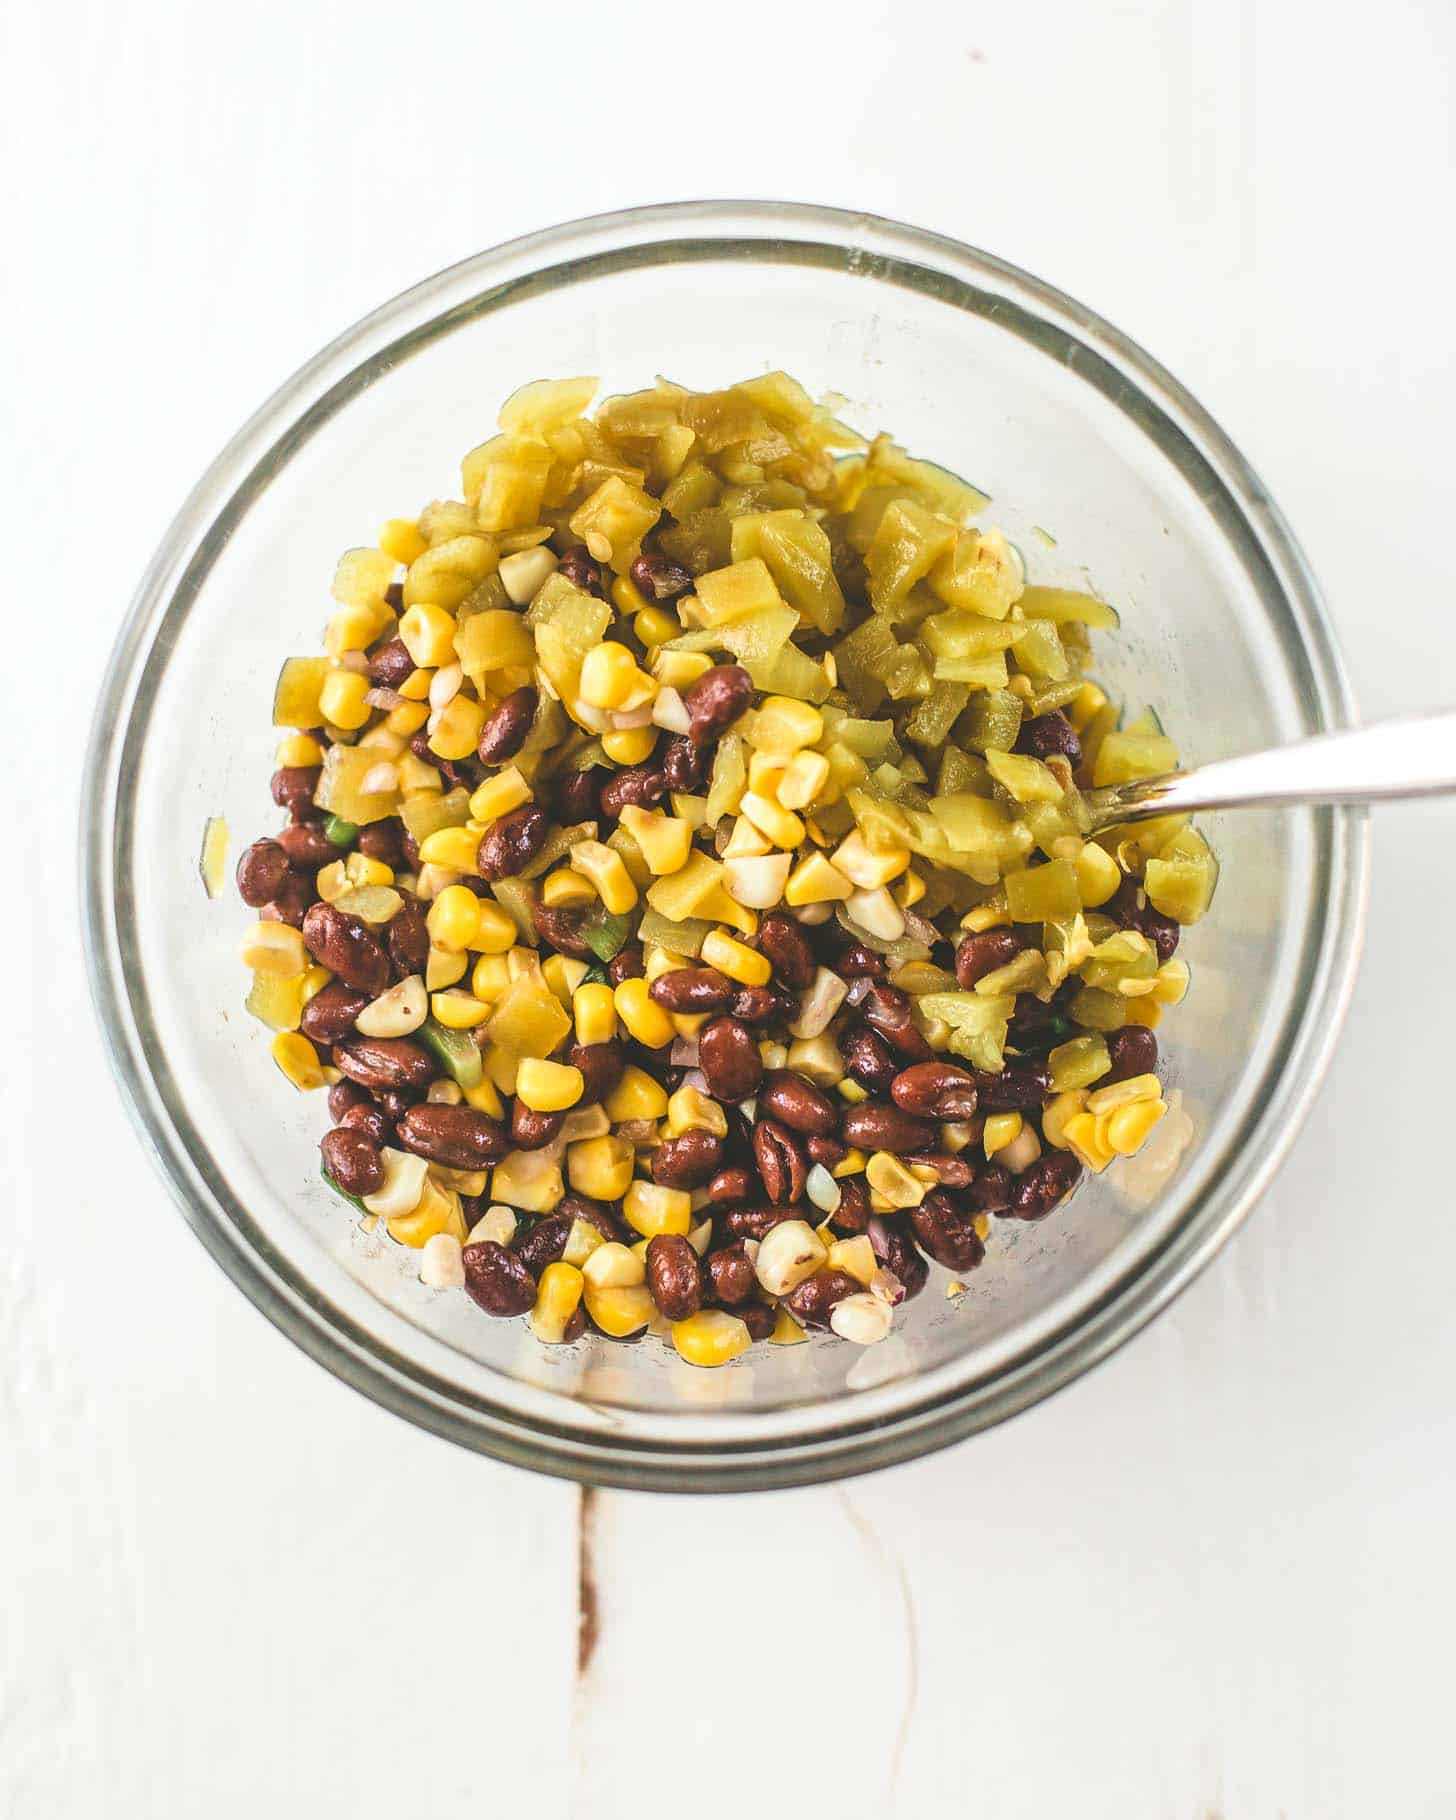 green chilis, corn and black beans in a clear bowl